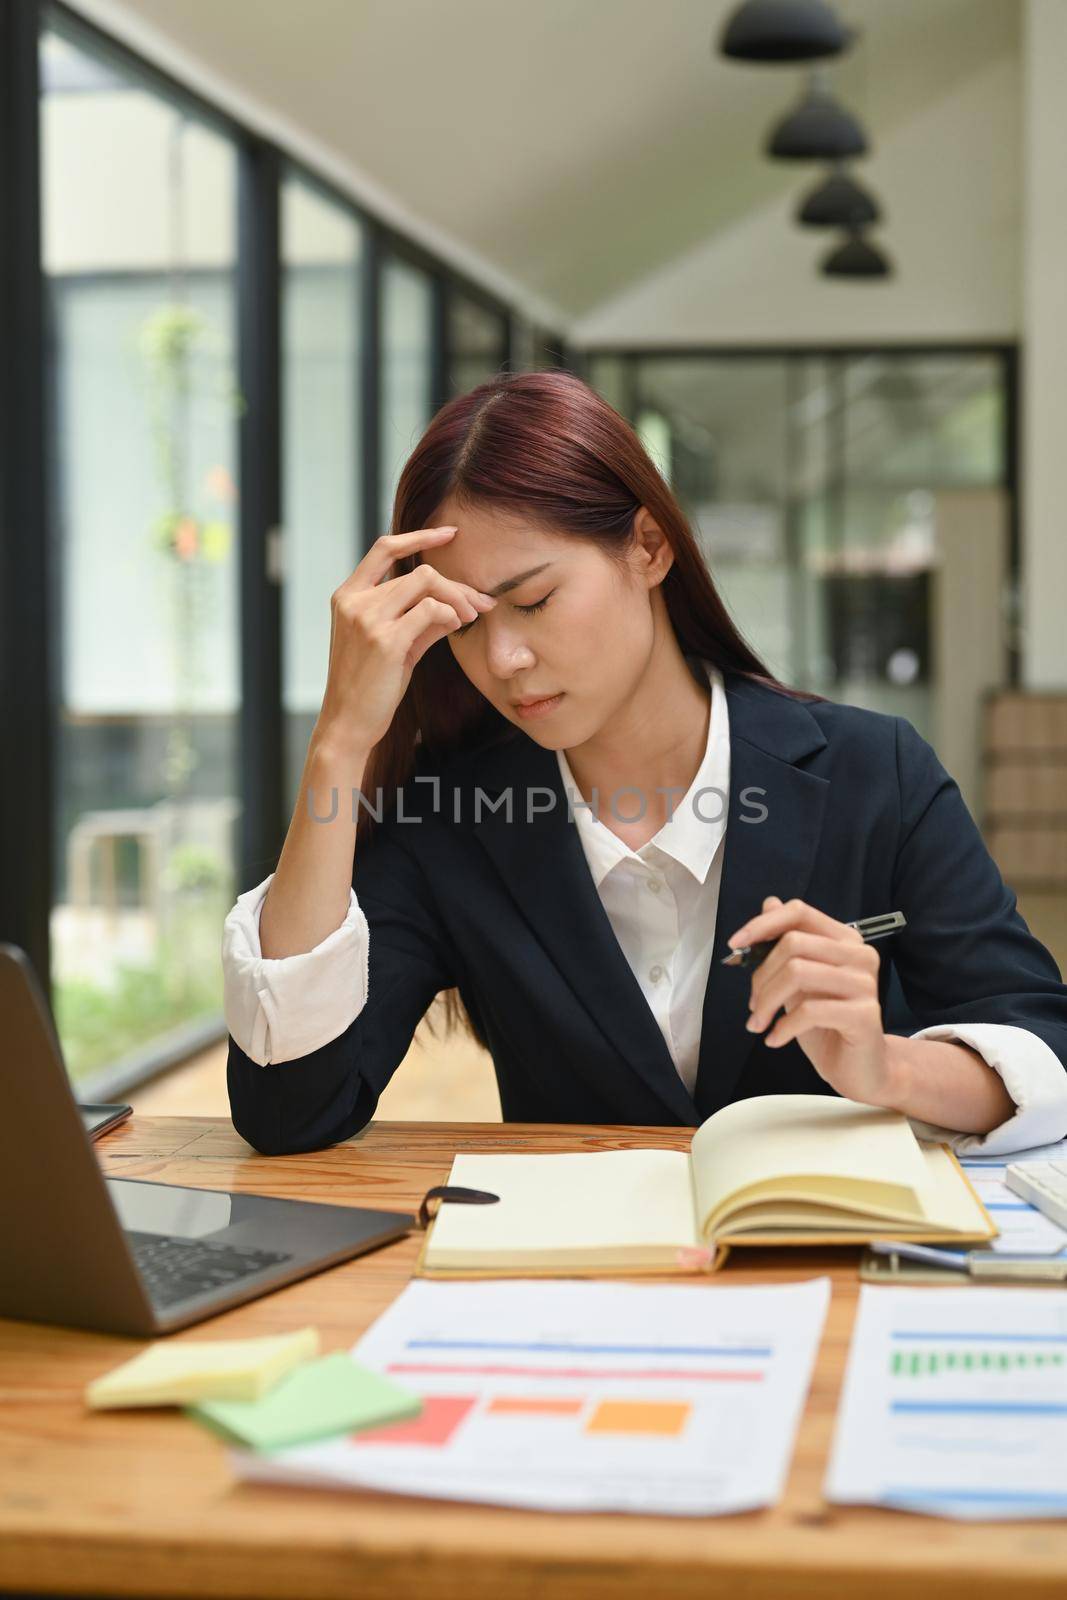 Frustrated young businesswoman stress from work or upset after finishing meeting. Emotional pressure, stress at work concept.